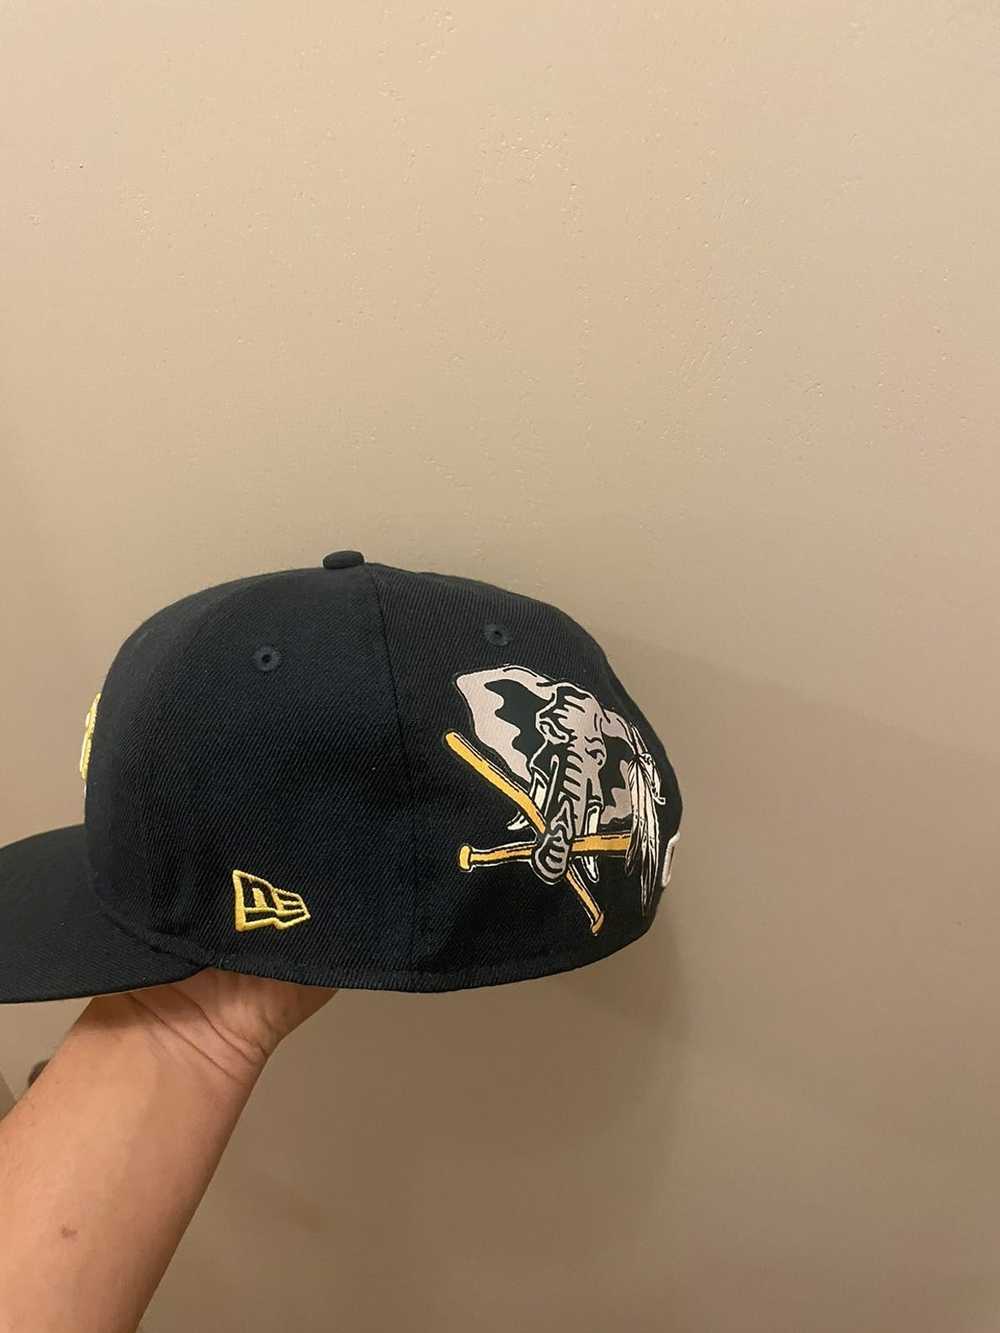 New! Rare! Oakland A's 2021 4th of July On Field Hat New Era